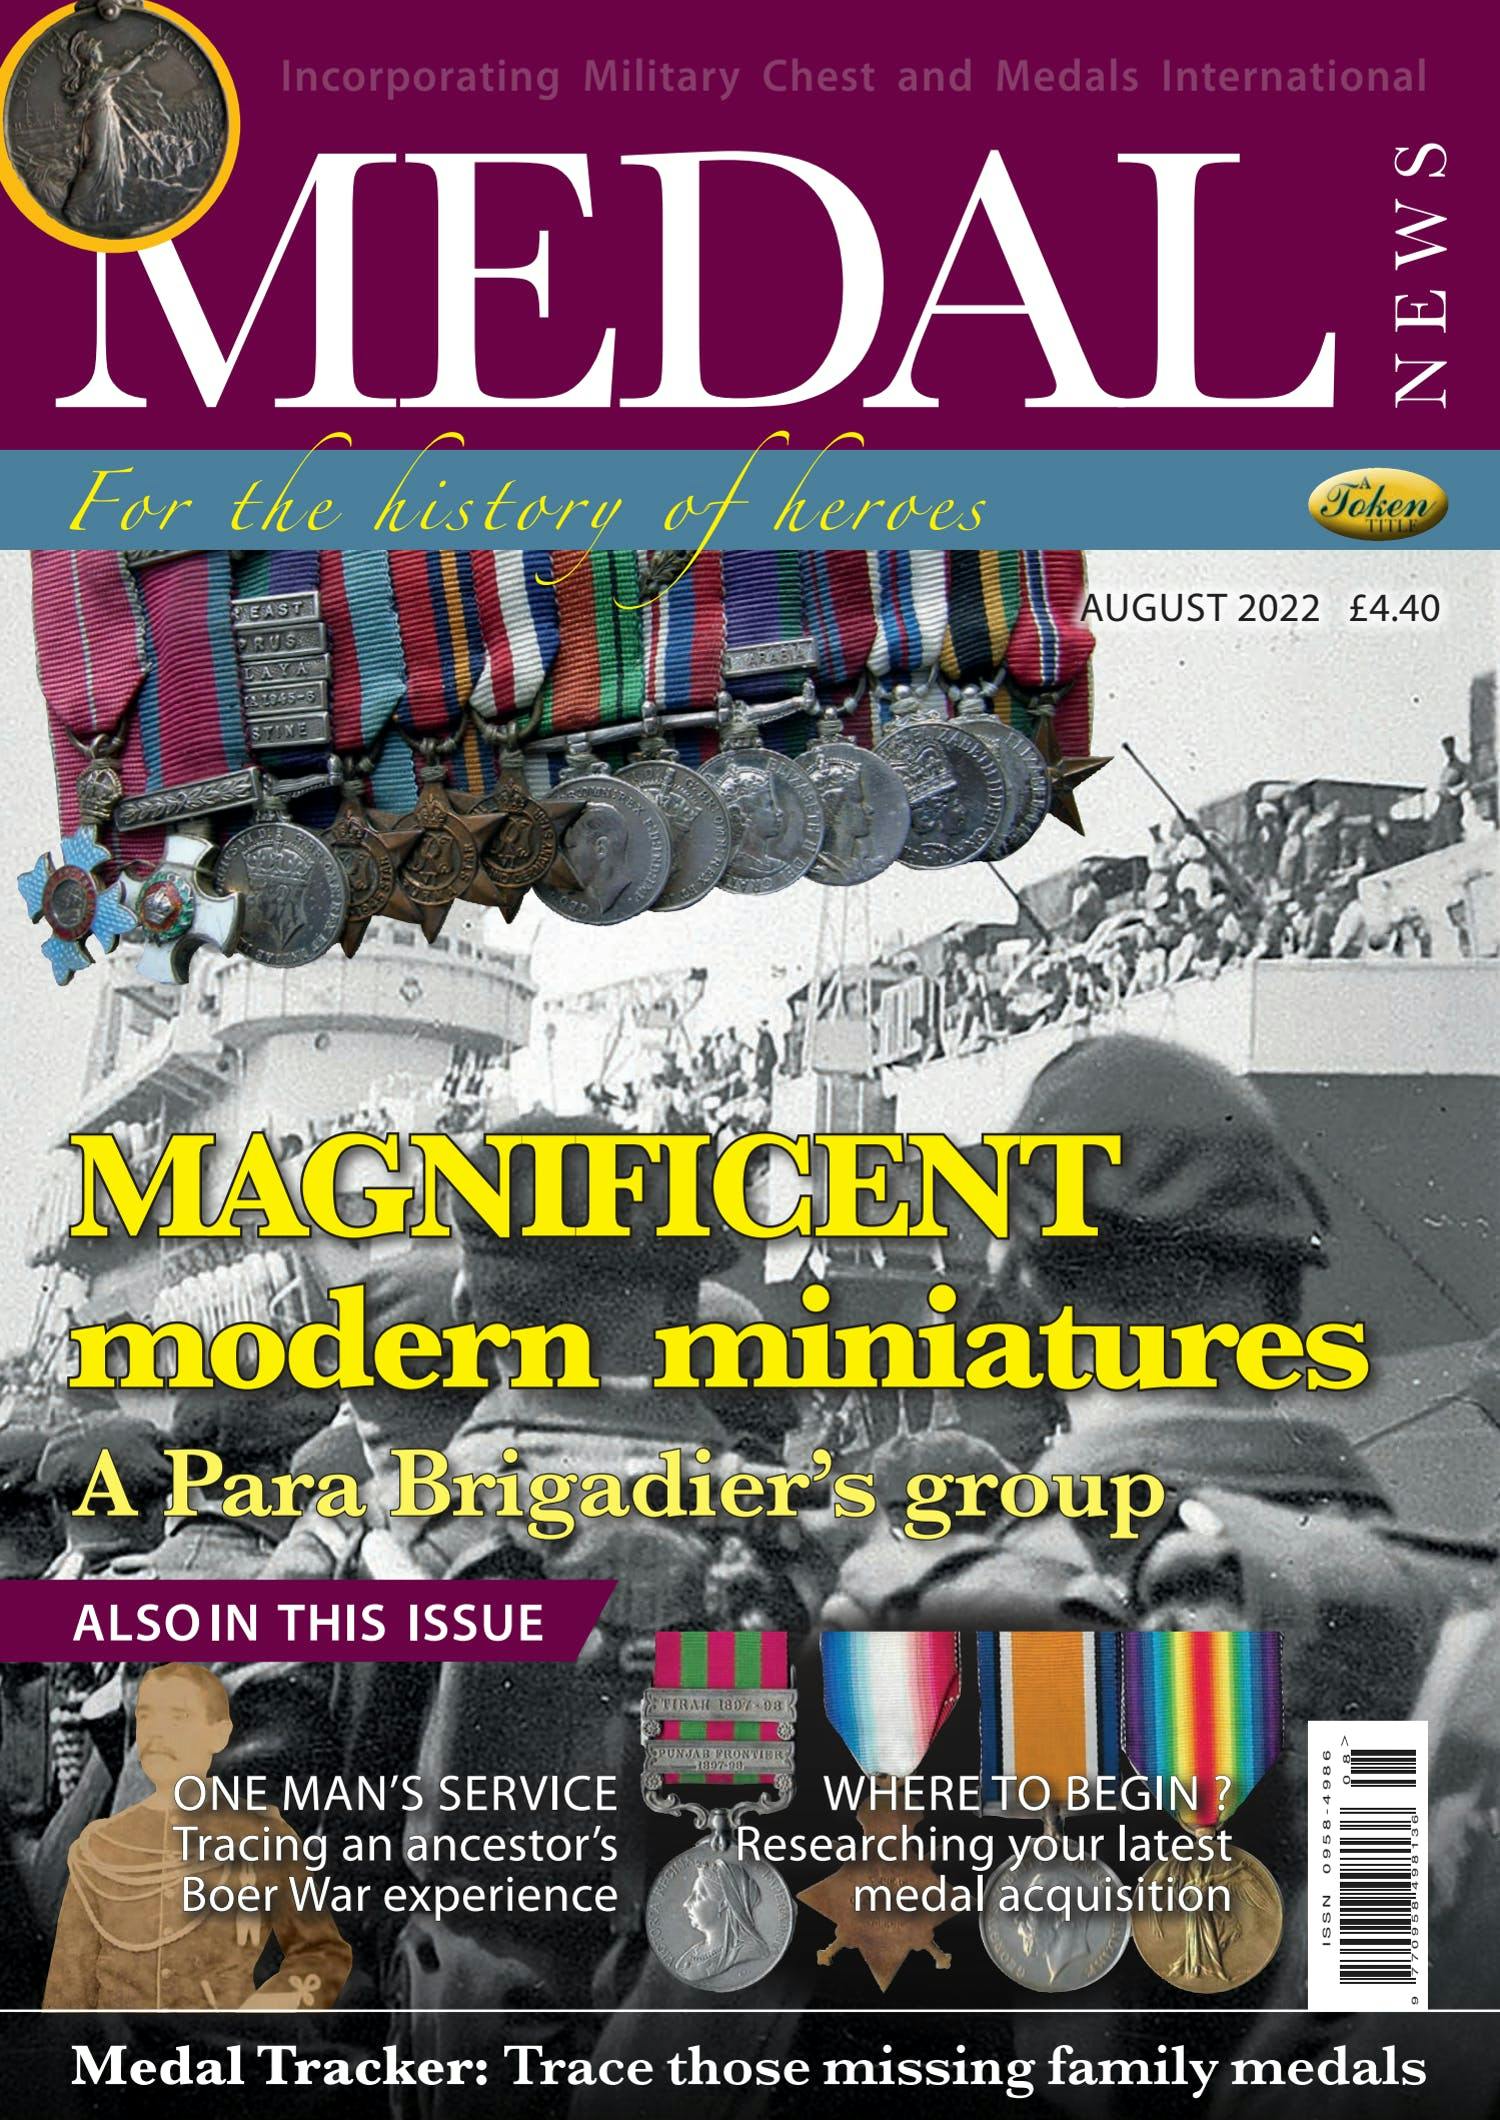 The front cover of Medal News, August 2022 - Volume 60, Number 7